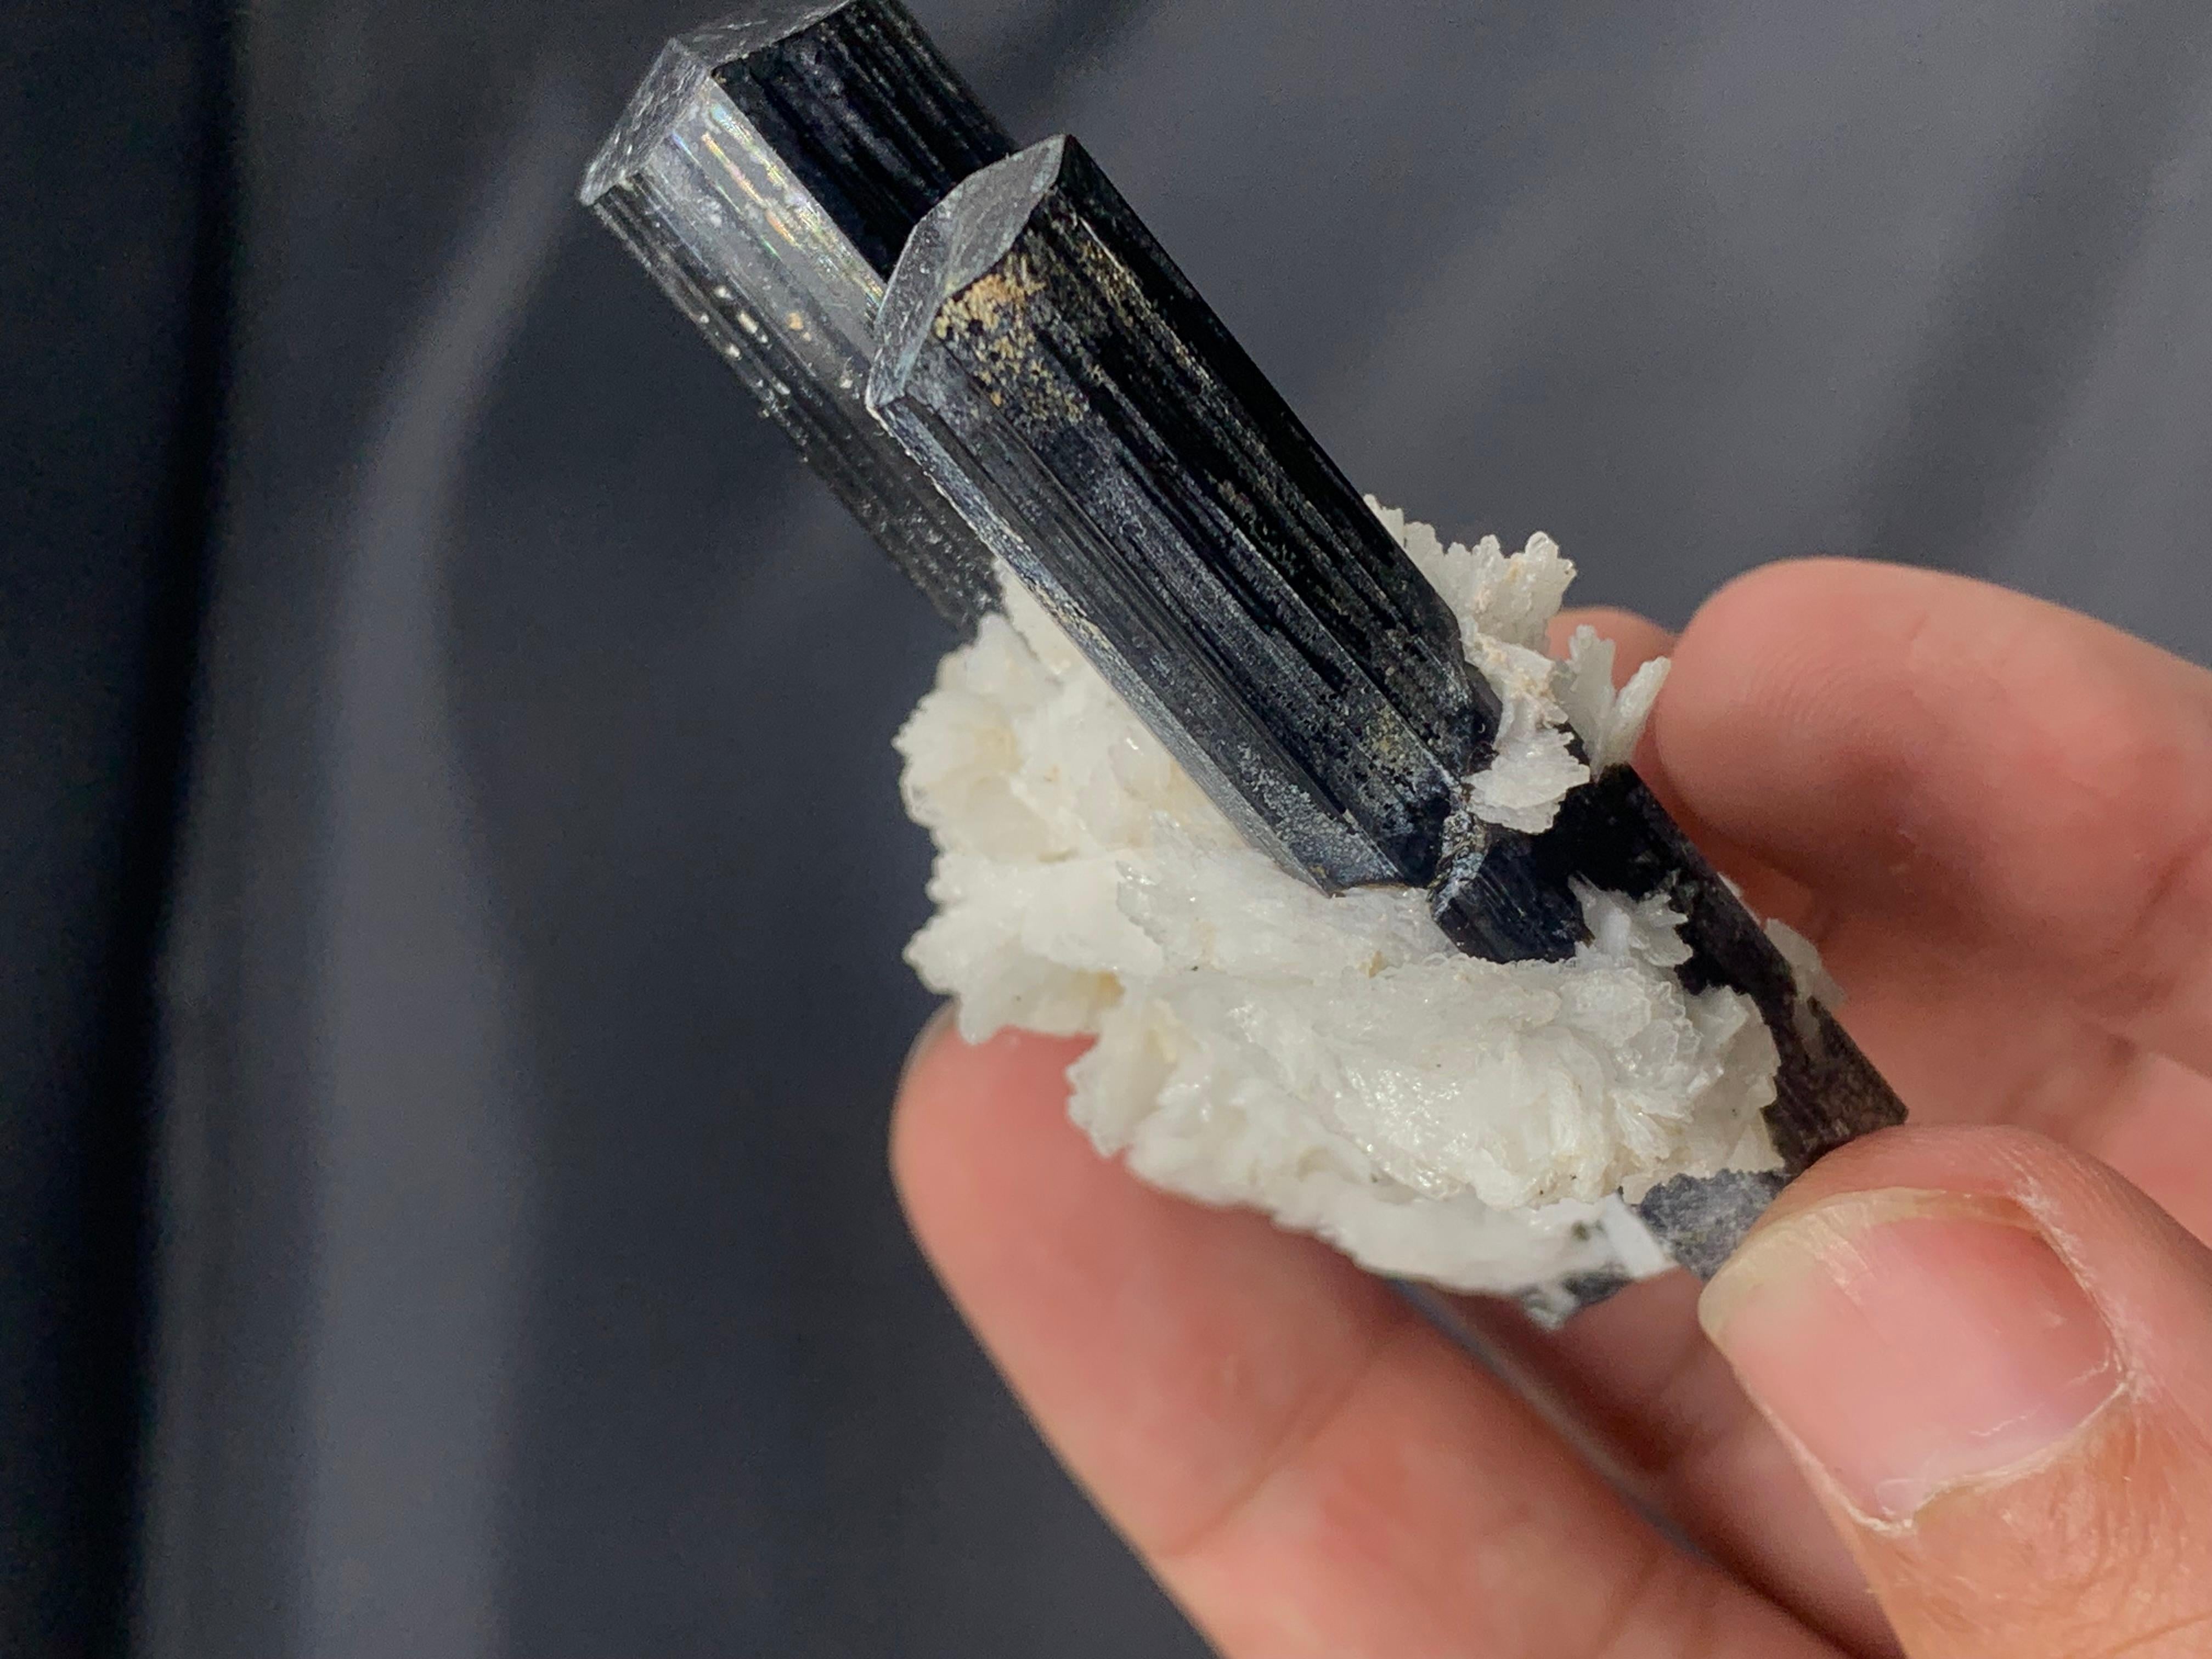 Natural black tourmaline twins specimen elongated on mica mother Rock 
WEIGHT : 59.48 grams
DIMENSIONS : 2.677 x 1.77 x 0.944 cm
ORIGIN : Skardu Valley, Pakistan
TREATMENT None
Tourmaline is an extremely popular gemstone; the name Tourmaline is